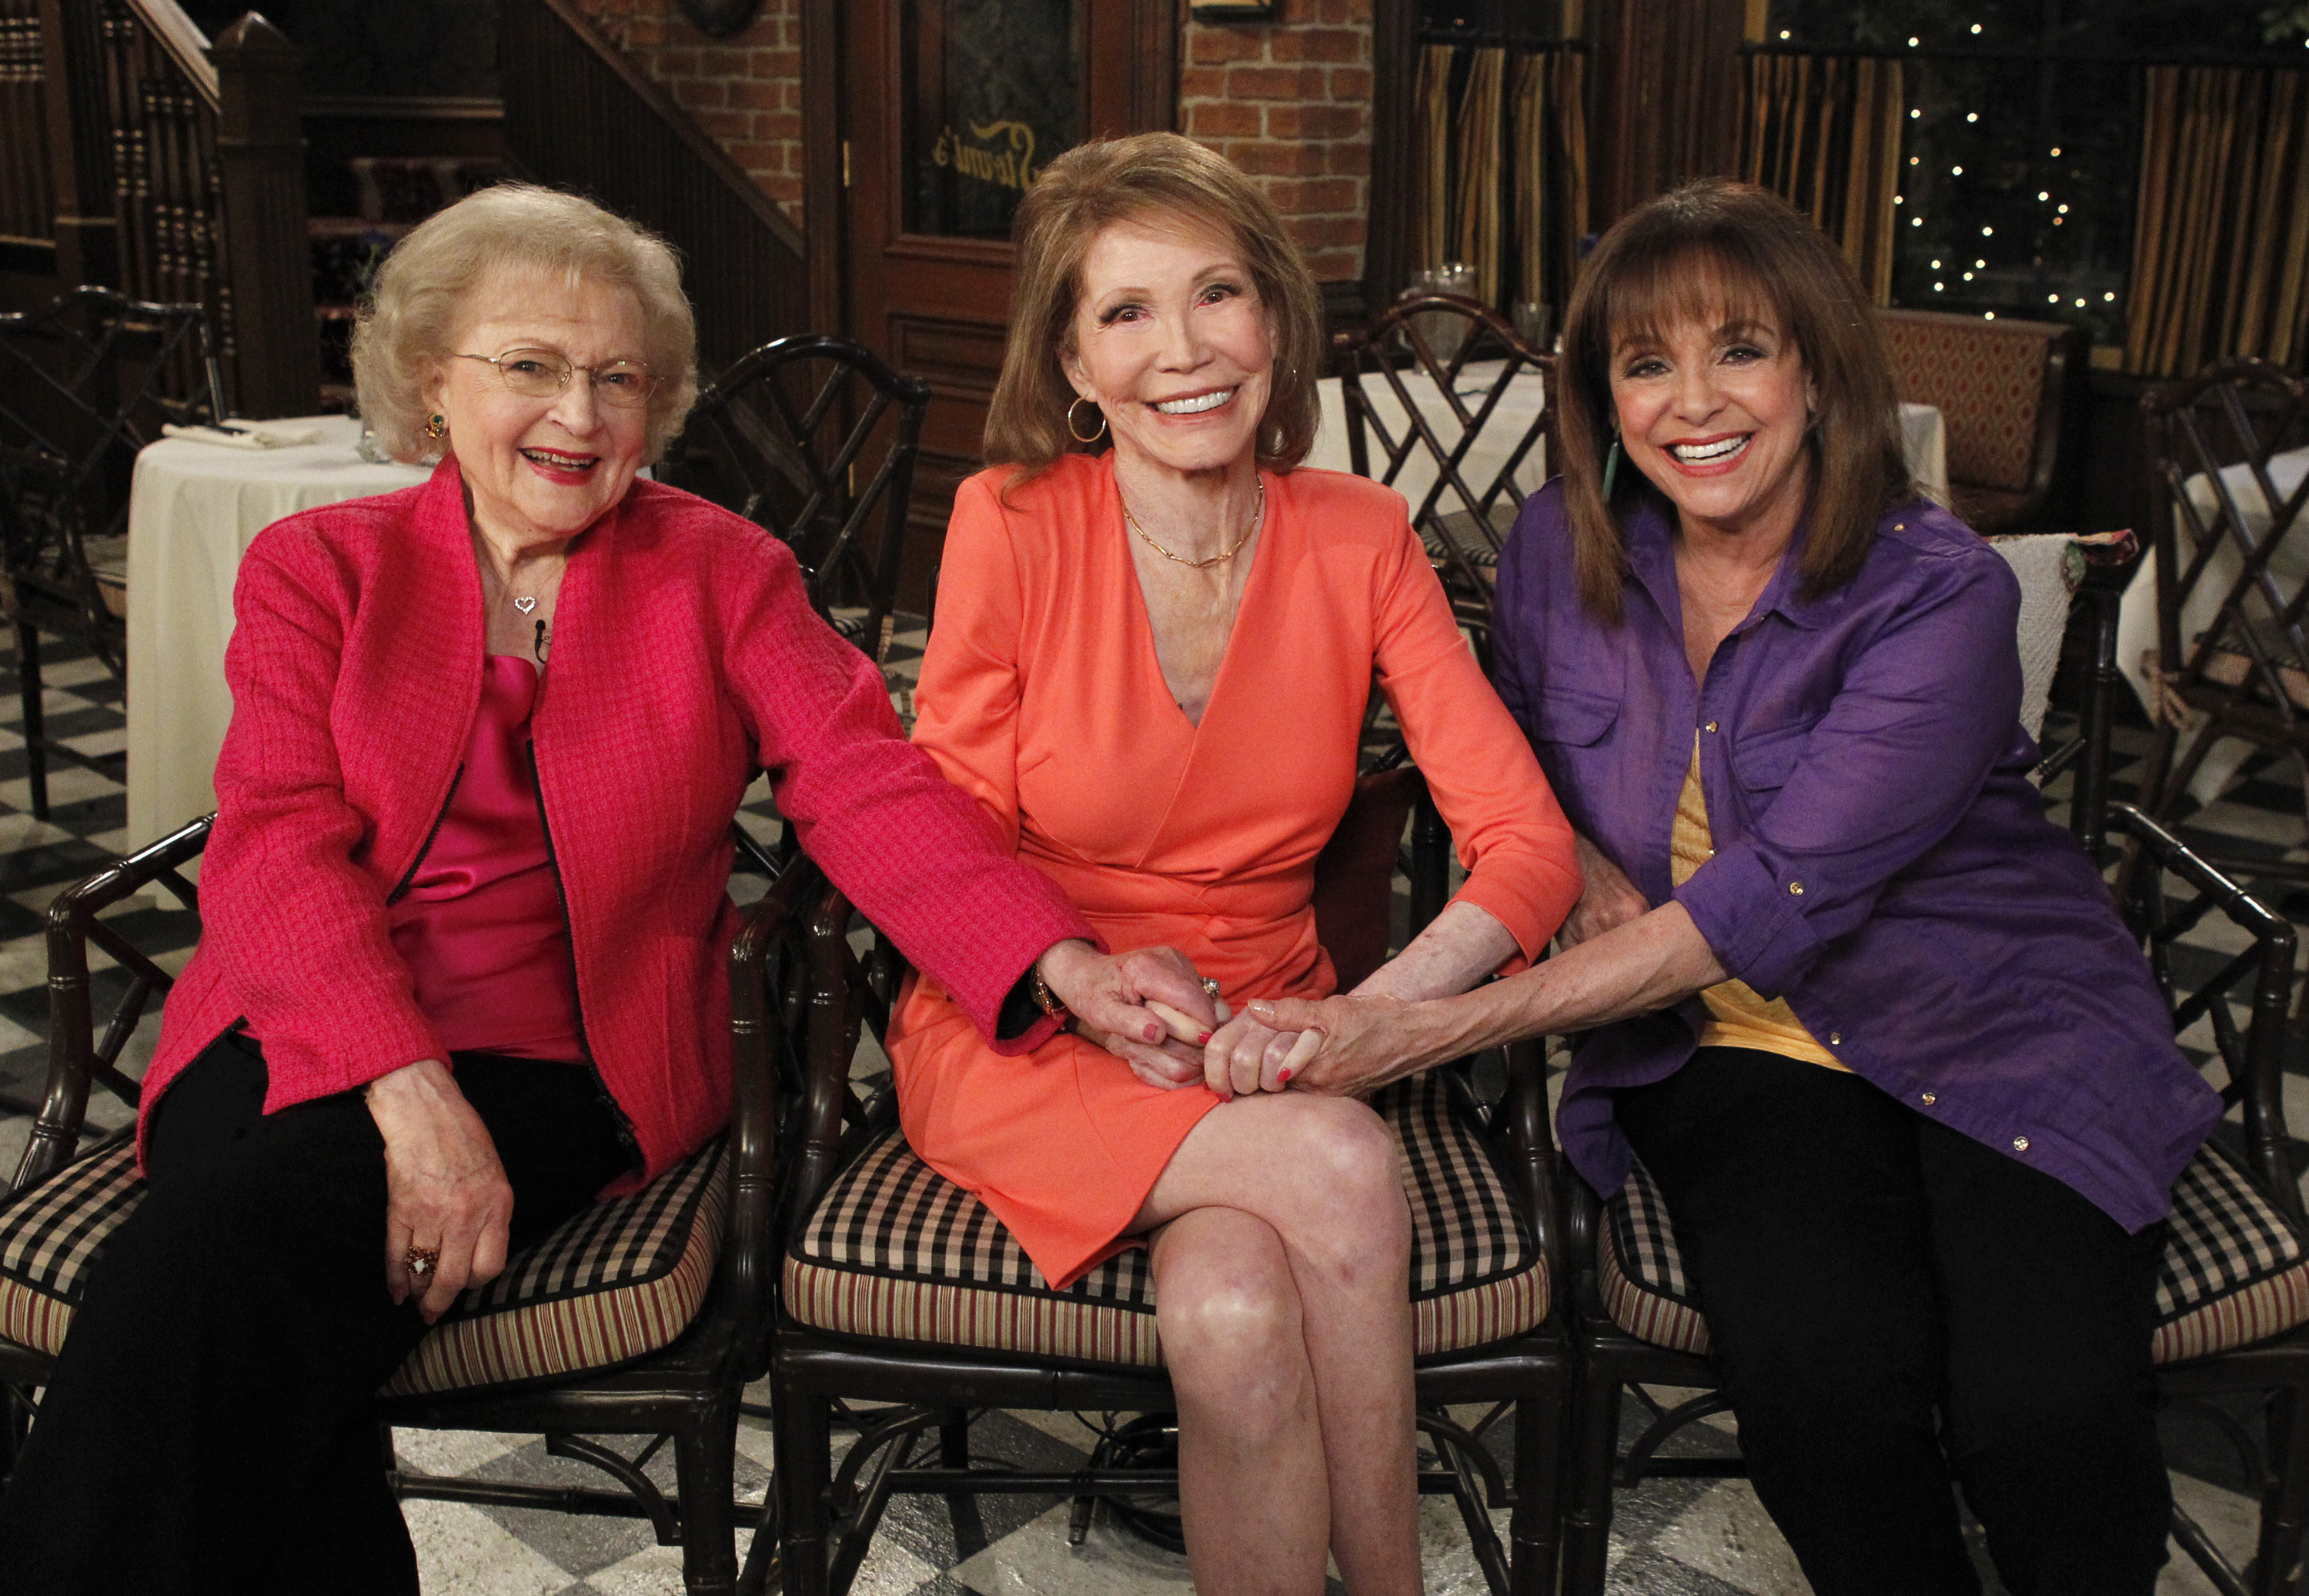 Betty White, left, with her 'The Mary Tyler Moore' costars, Mary Tyler Moore and Valerie Harper